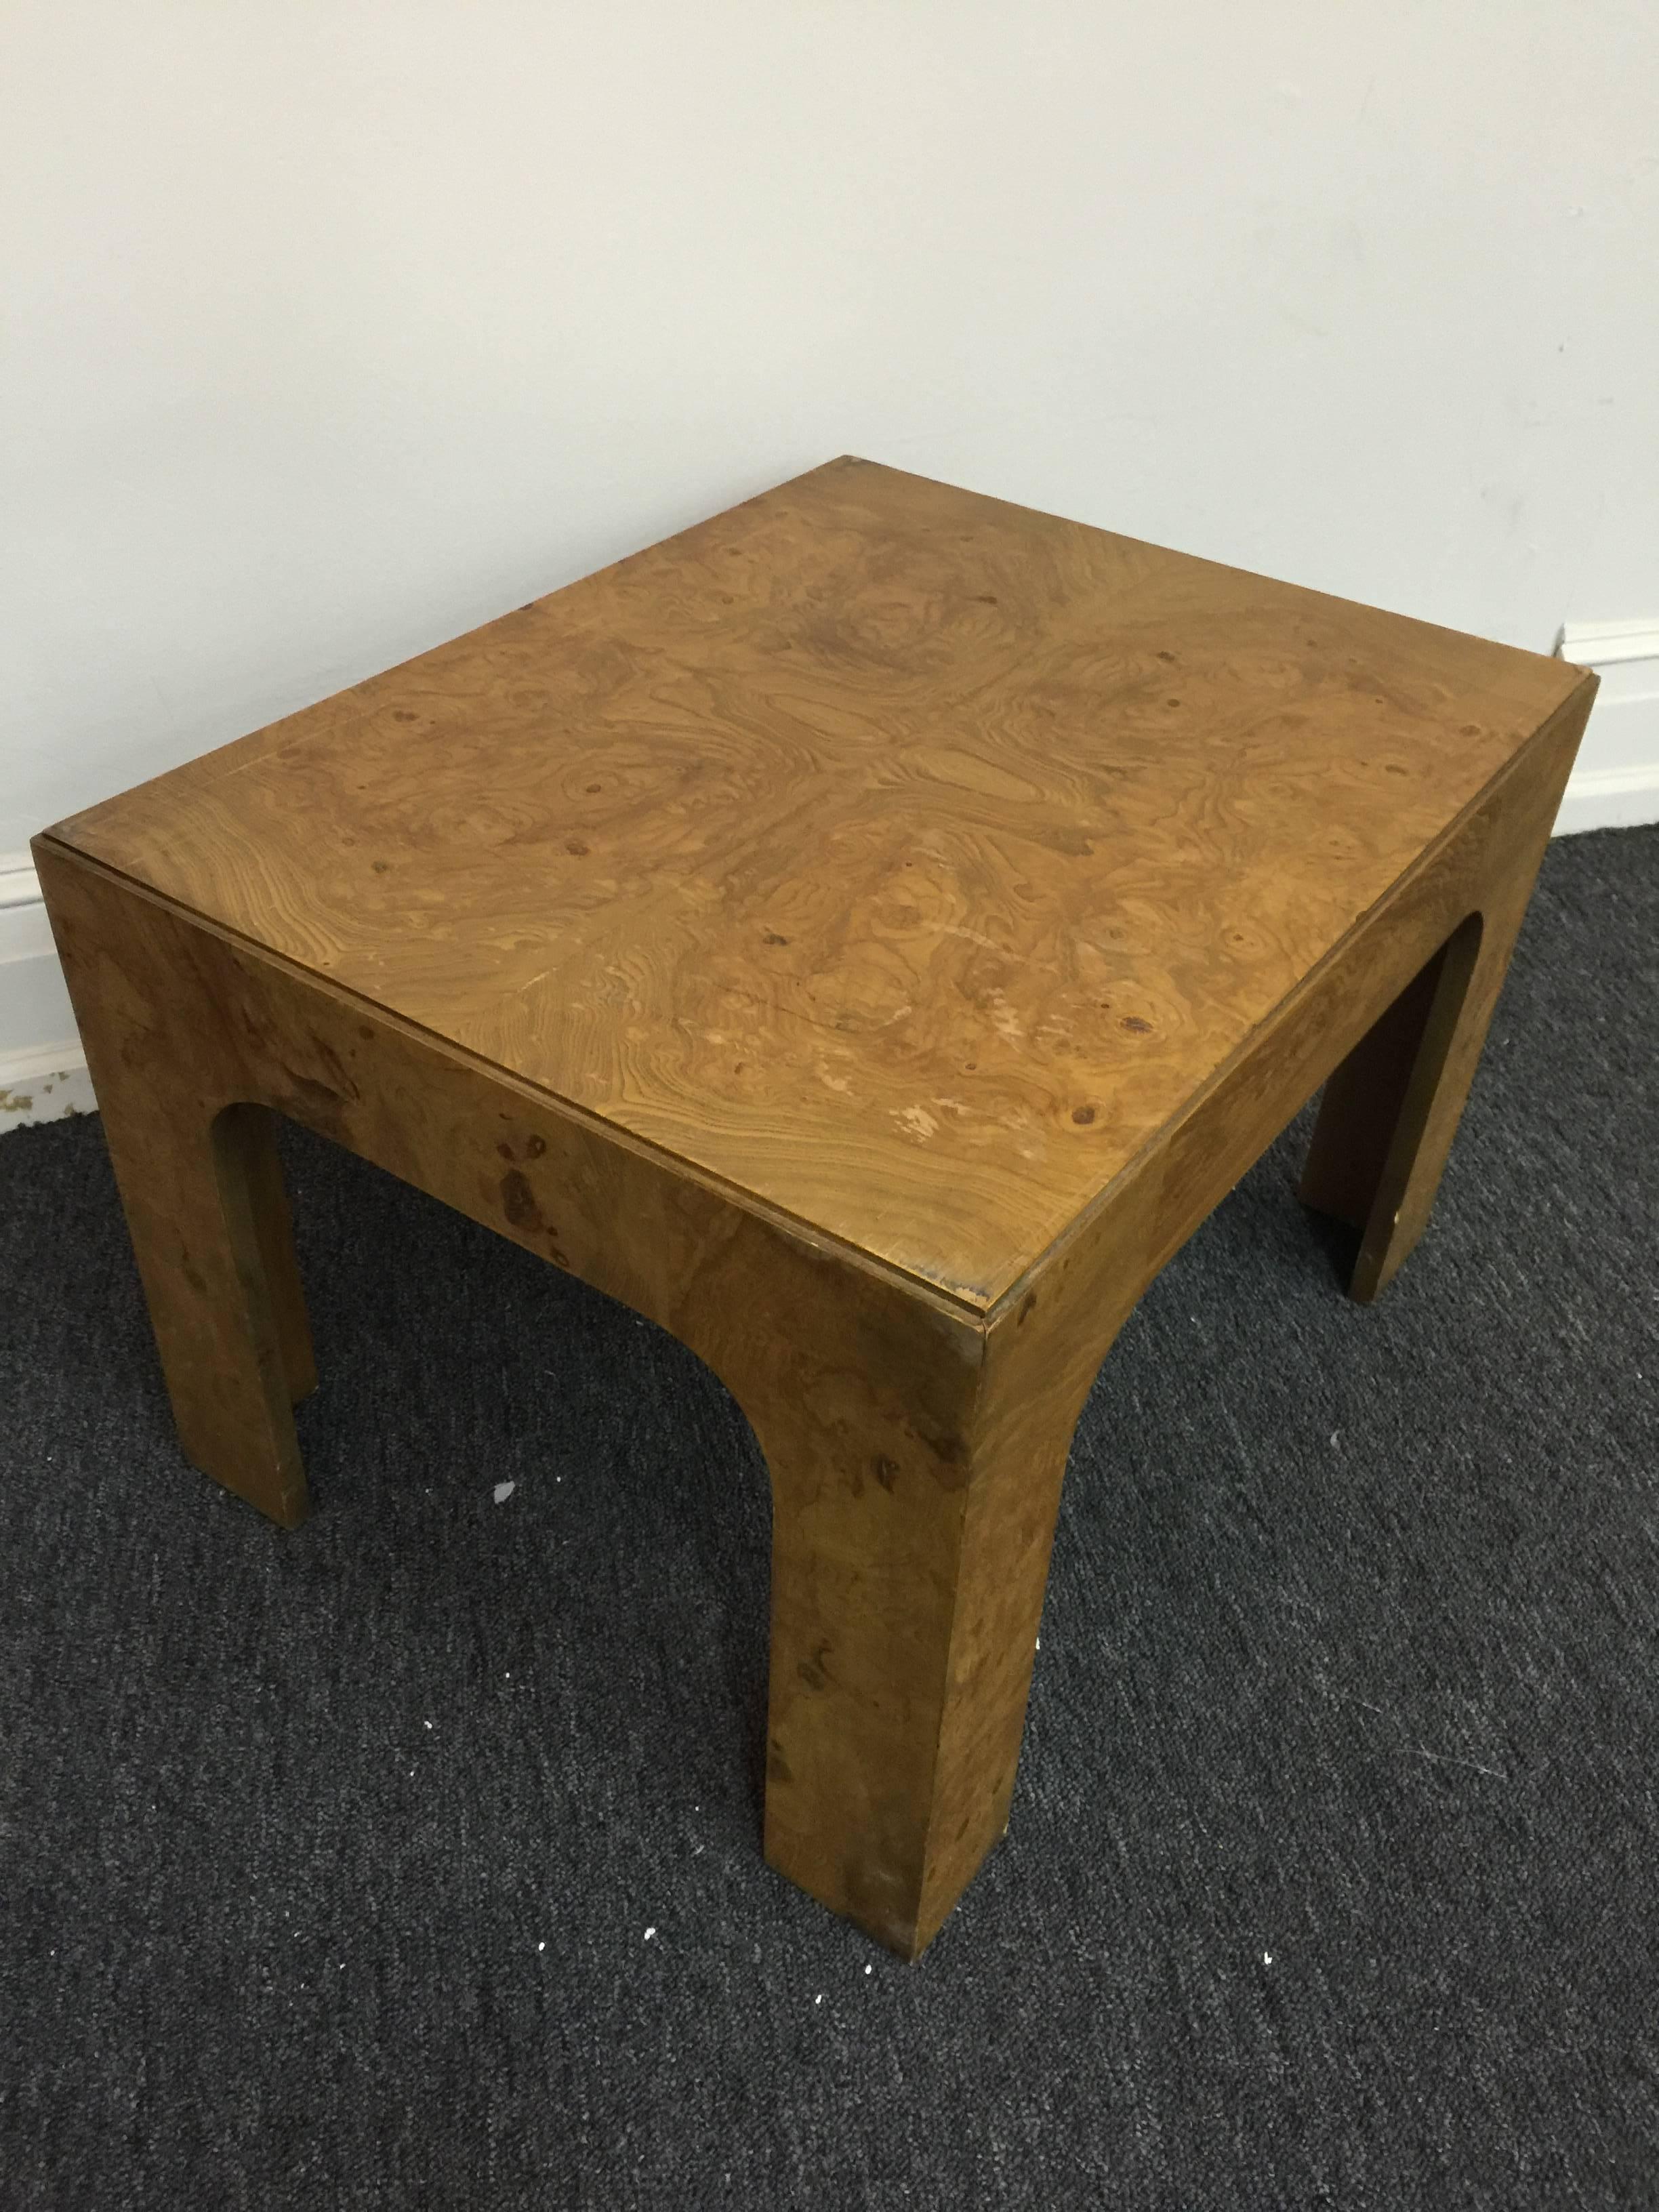 Burl Wood Coffee Table by Milo Baughman, circa 1970 In Good Condition For Sale In Mount Penn, PA